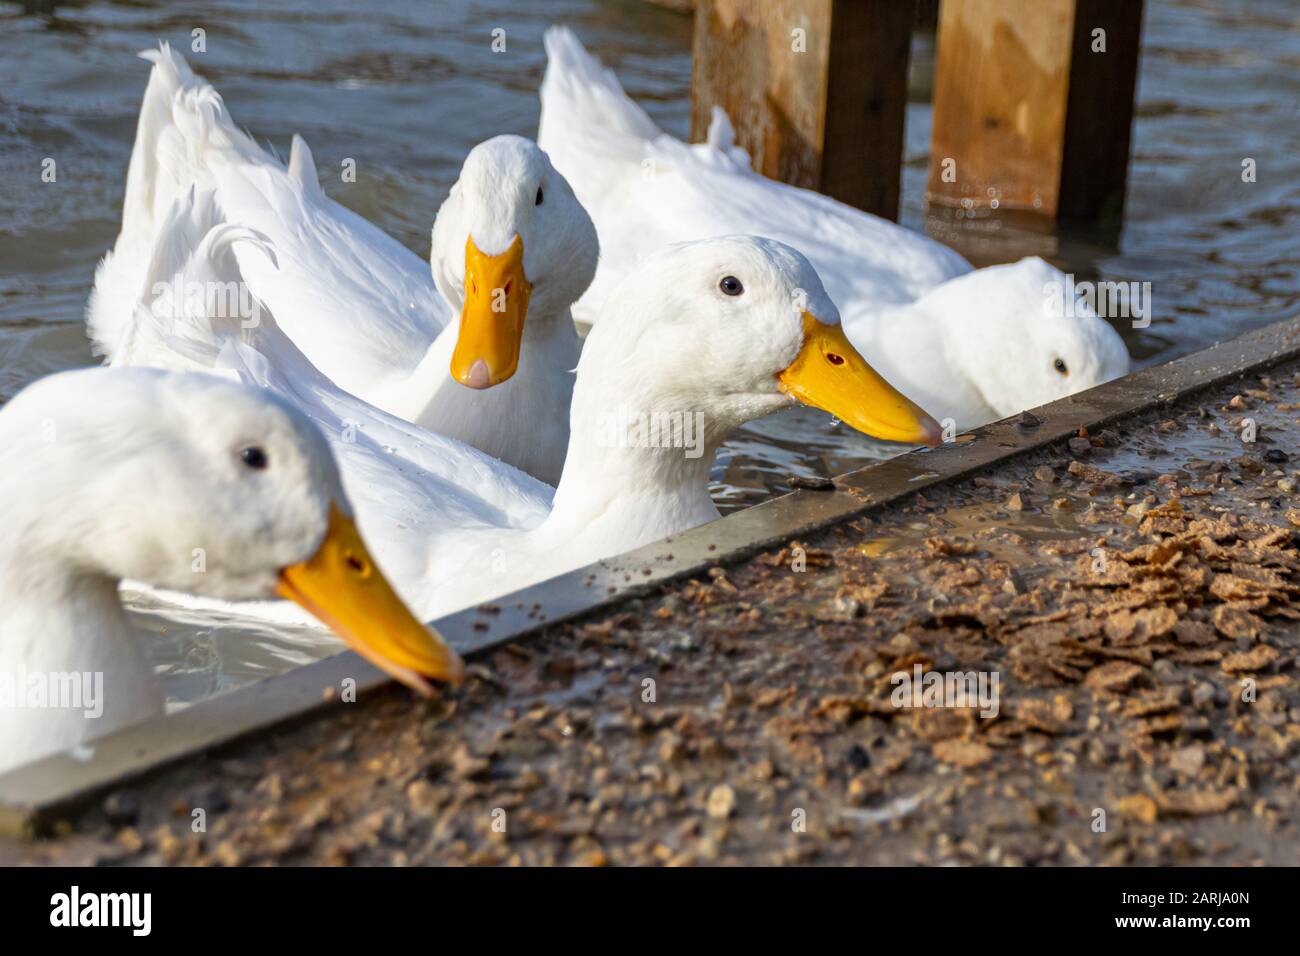 White pekin ducks investigating and eating cereal food Stock Photo